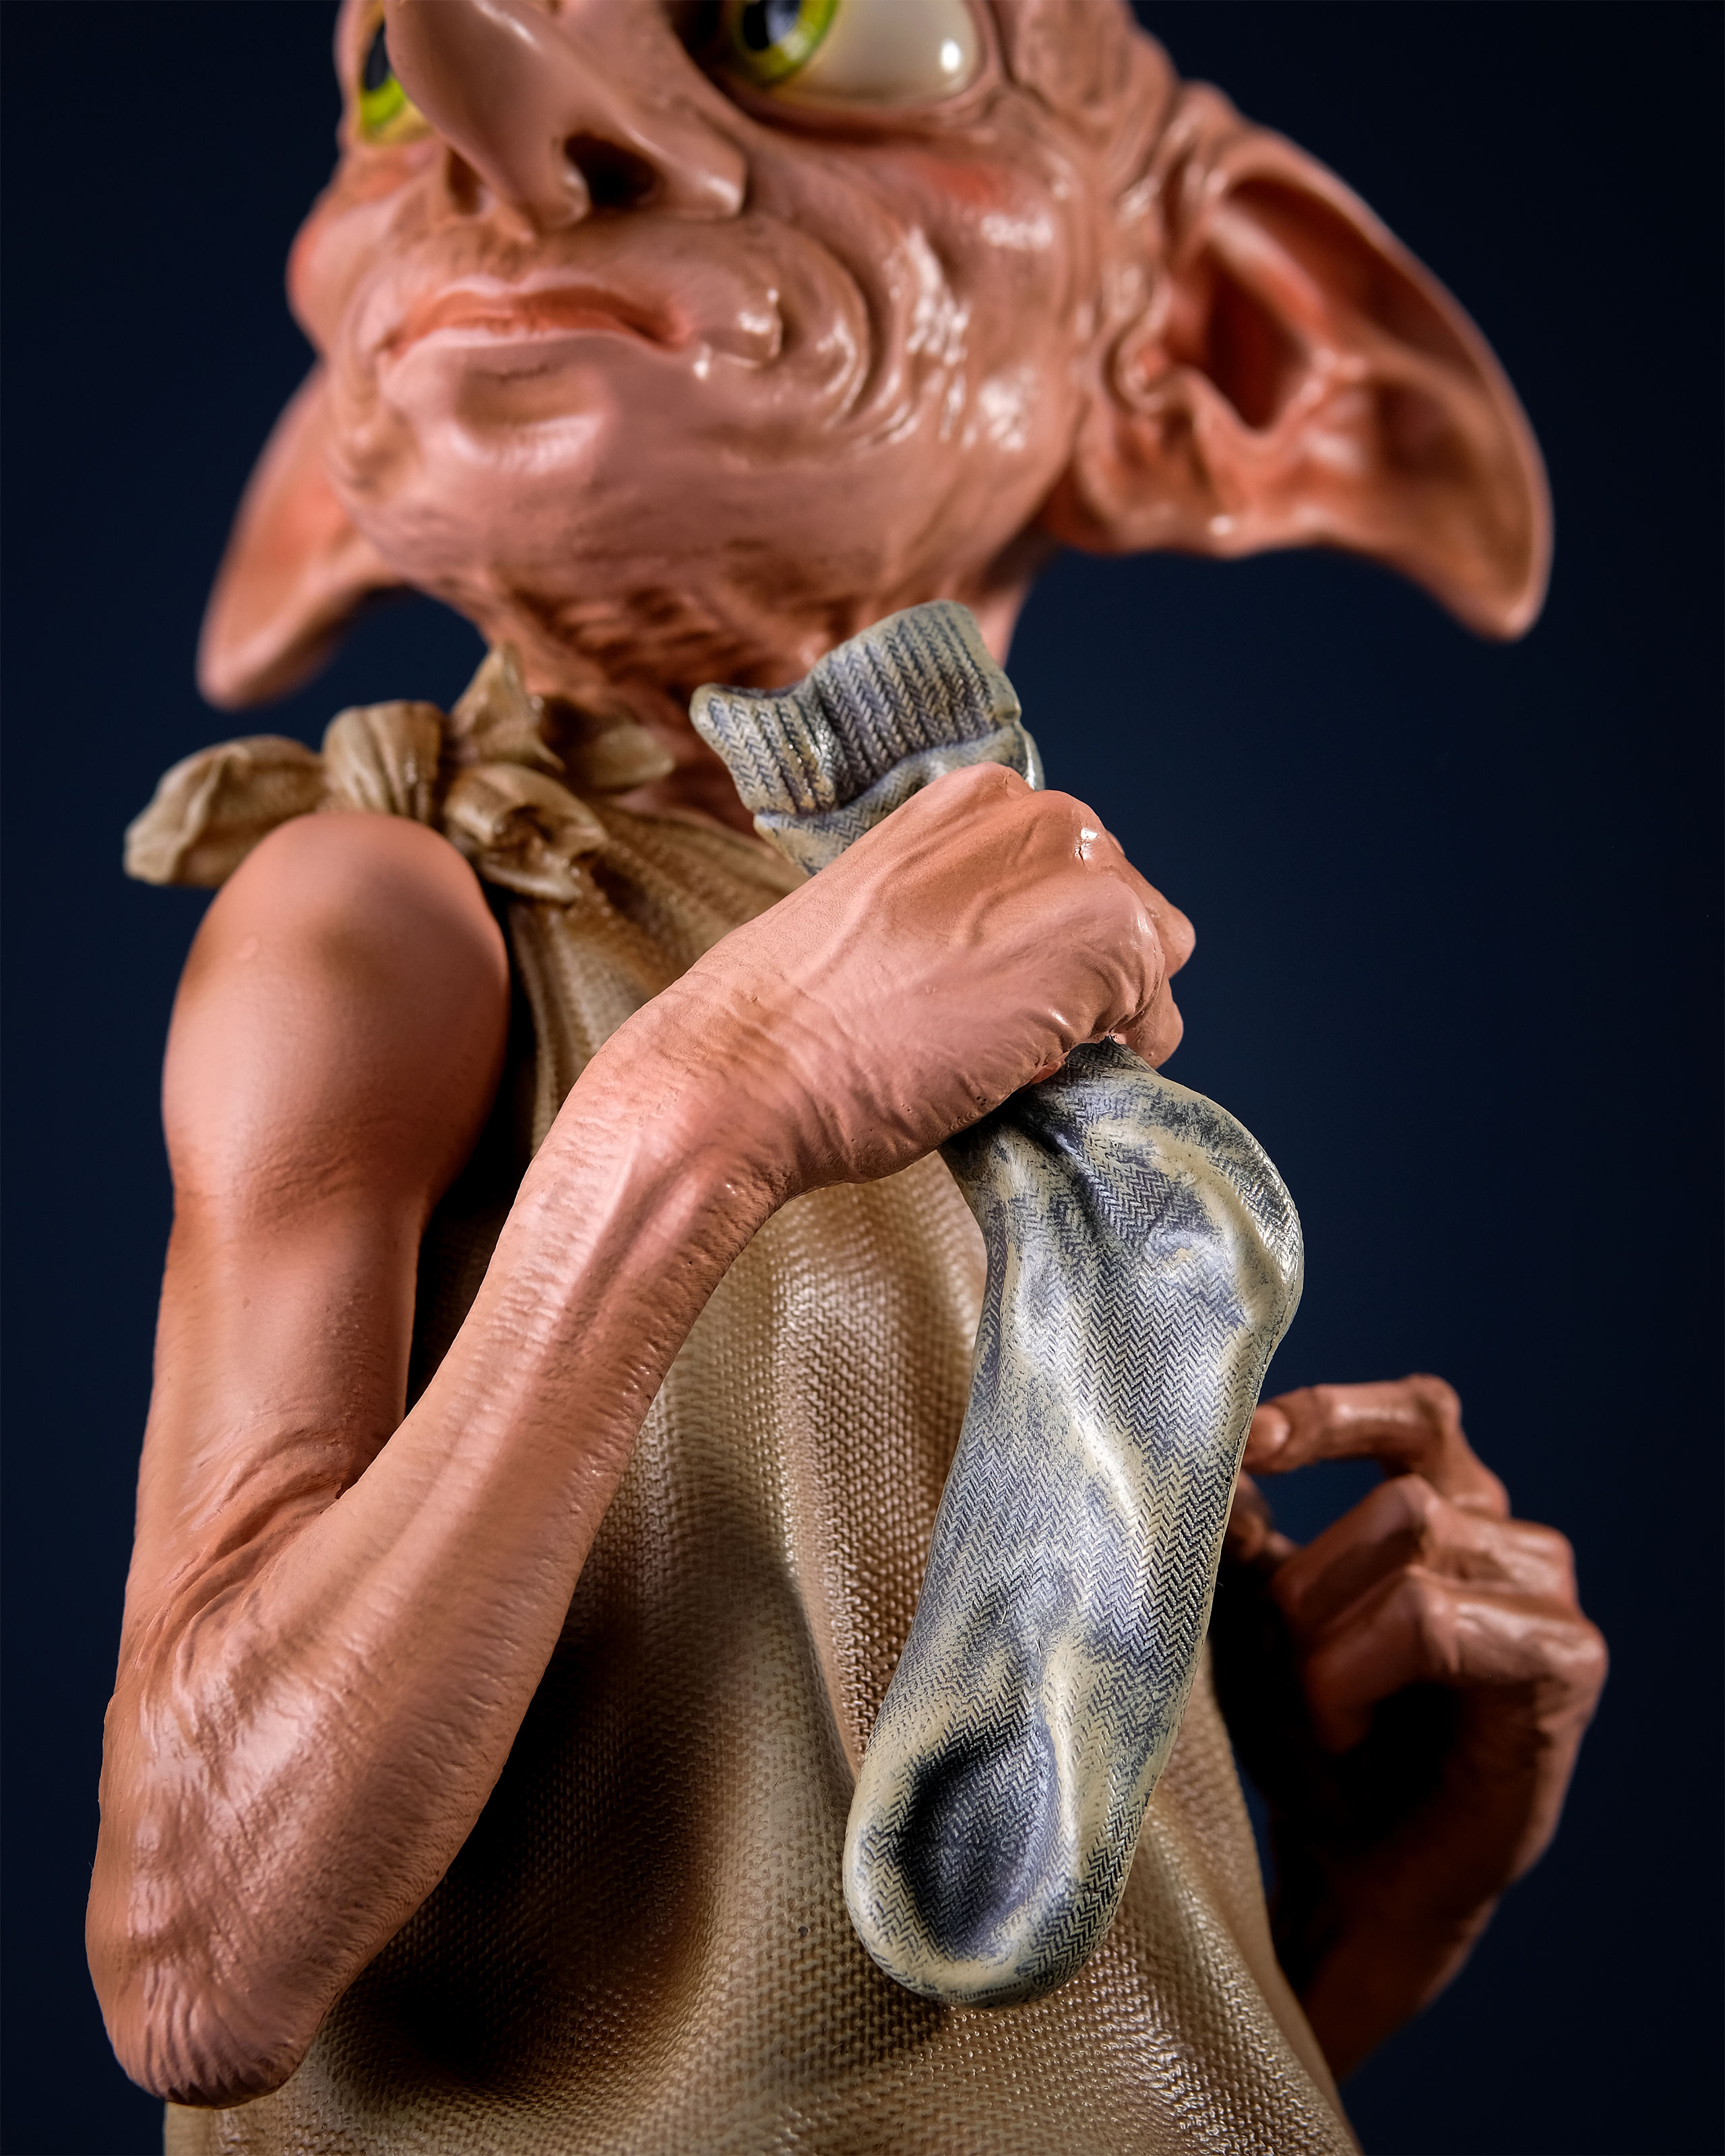 Dobby (Harry Potter) Bust (AW413) – Ancient Warrior